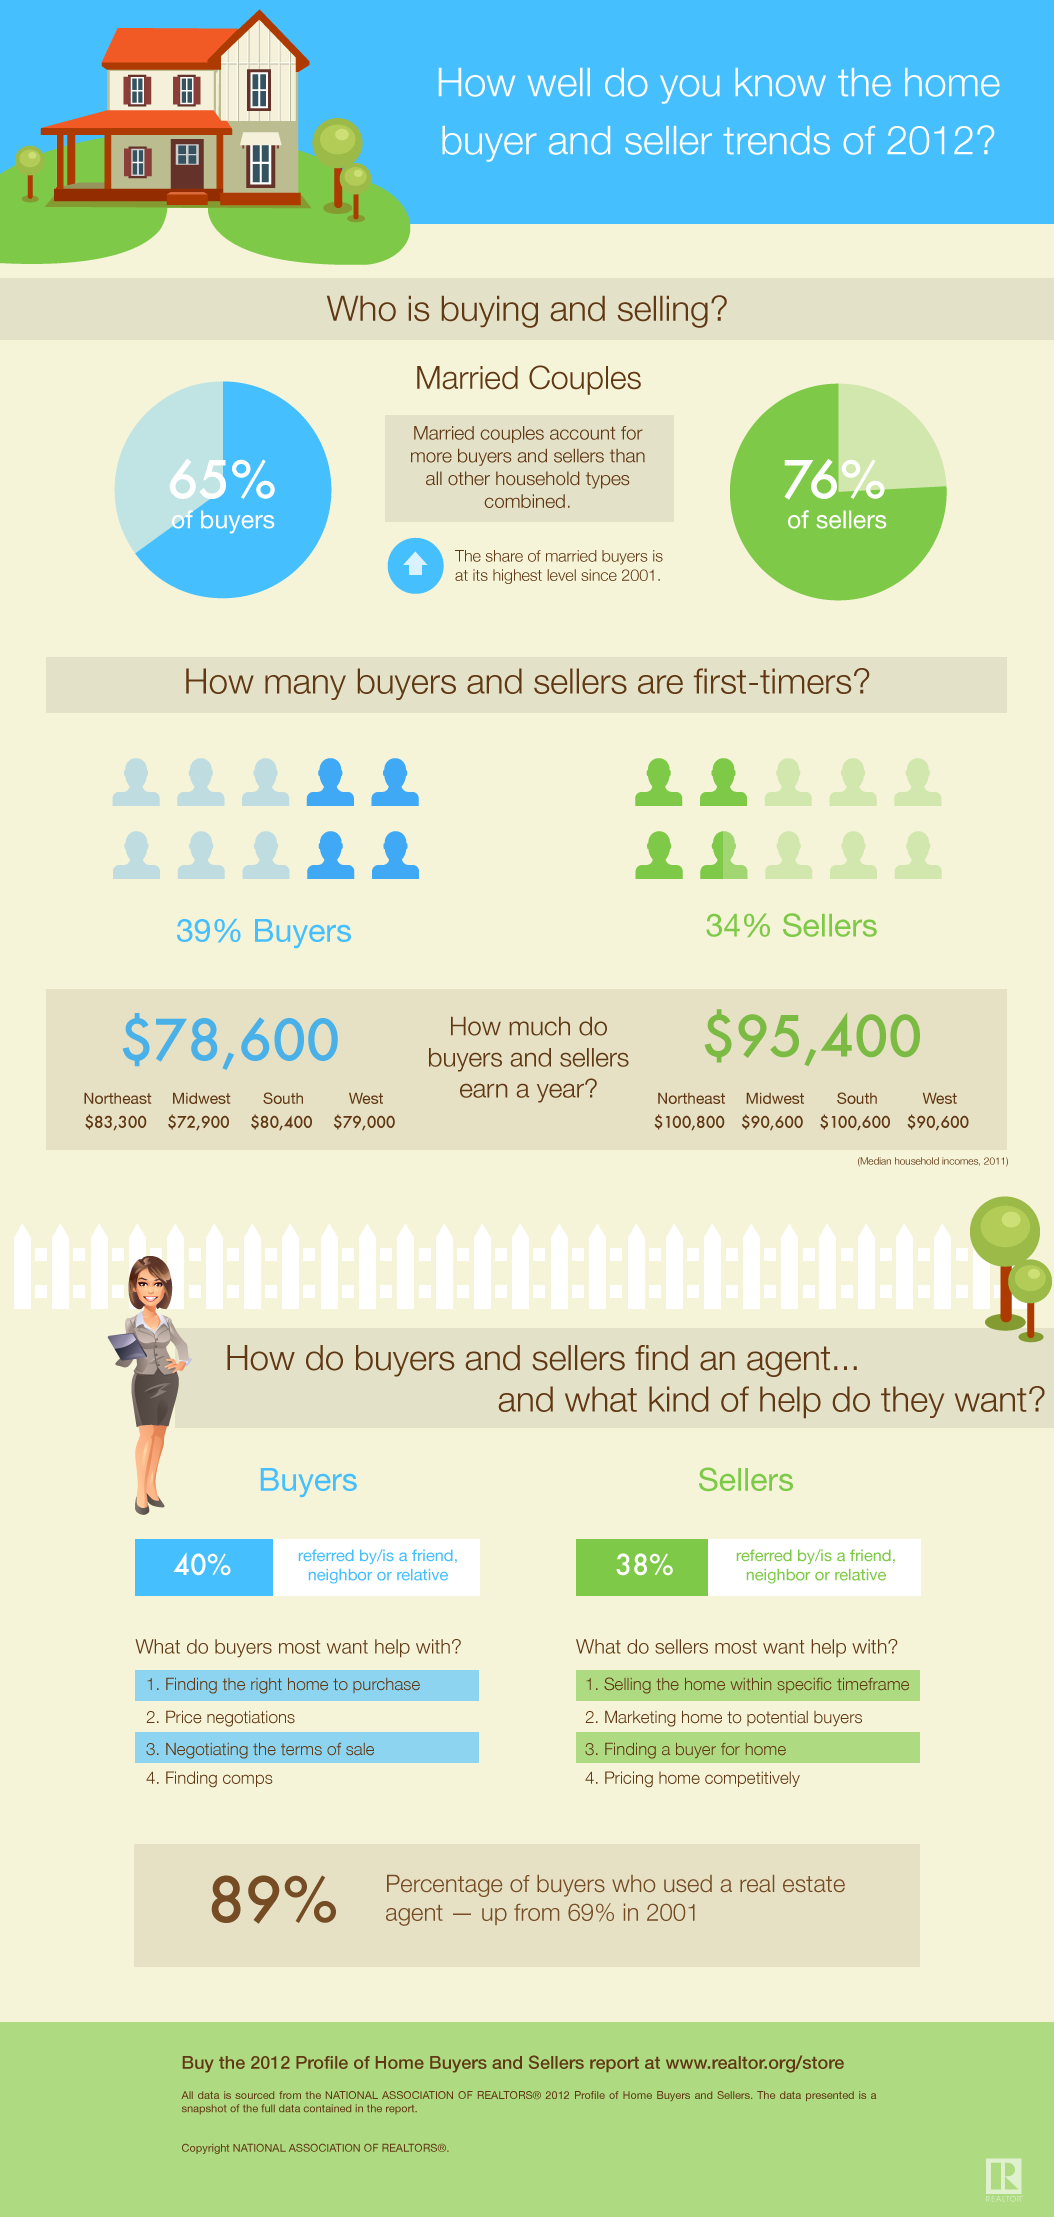 Real estate agents can leverage their real estate CRM to snag first time buyers